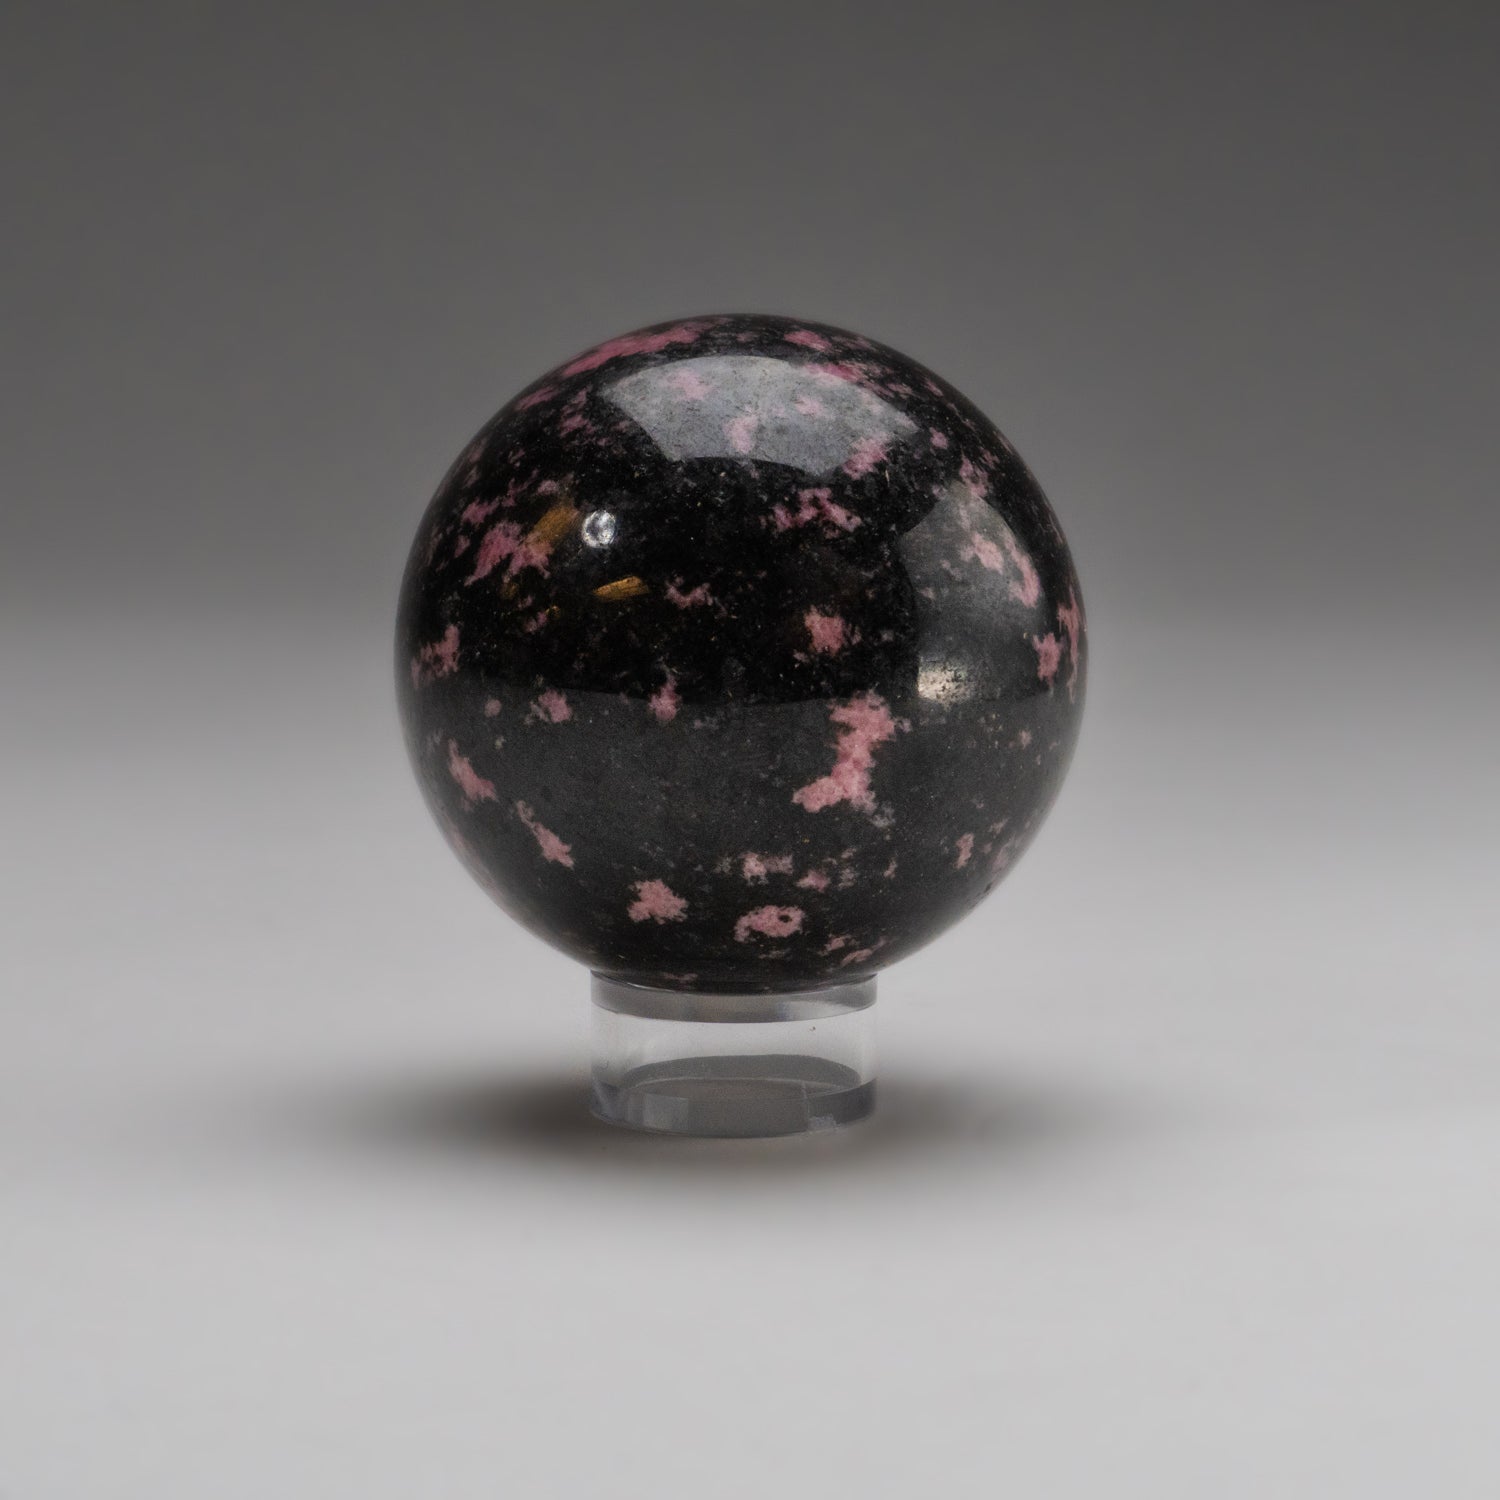 Polished Imperial Rhodonite Sphere from Madagascar (1.2 lbs)